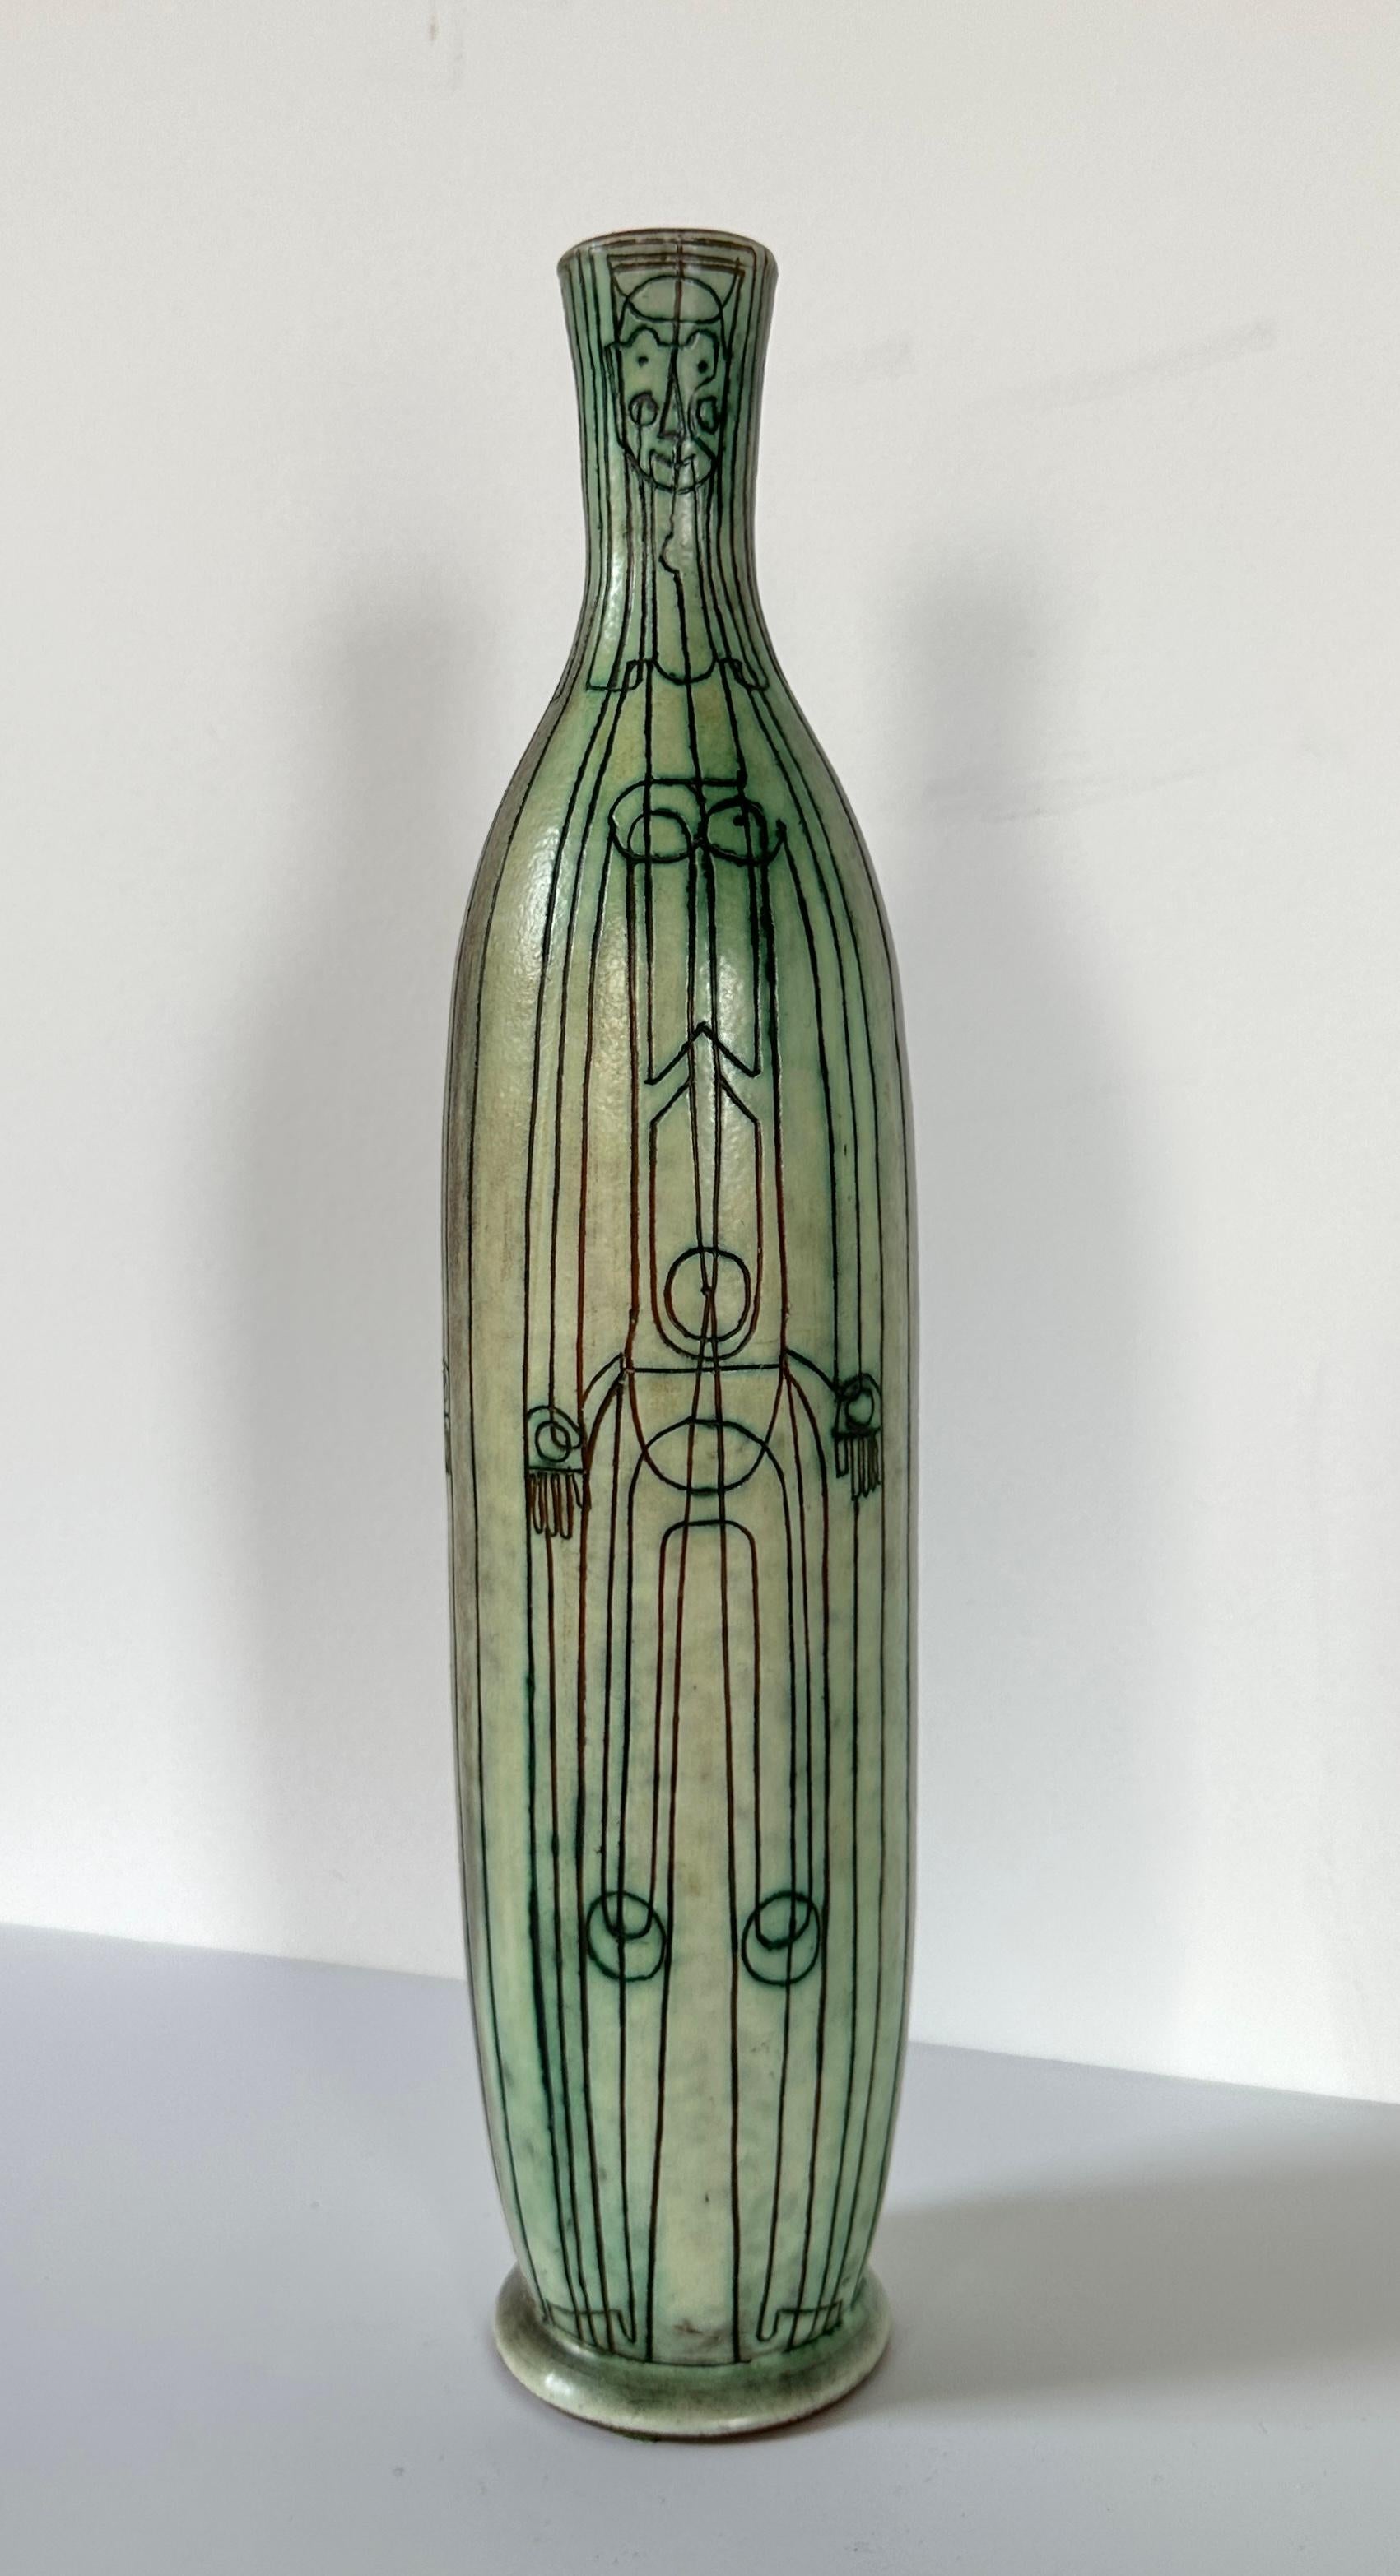 A charming sgraffito vase by Theo and Susan Halander of Ontario, Canada. Three figures inscribed onto this verdigris-like glazed surface give it a lively storytelling aesthetic. Mid-20th century.